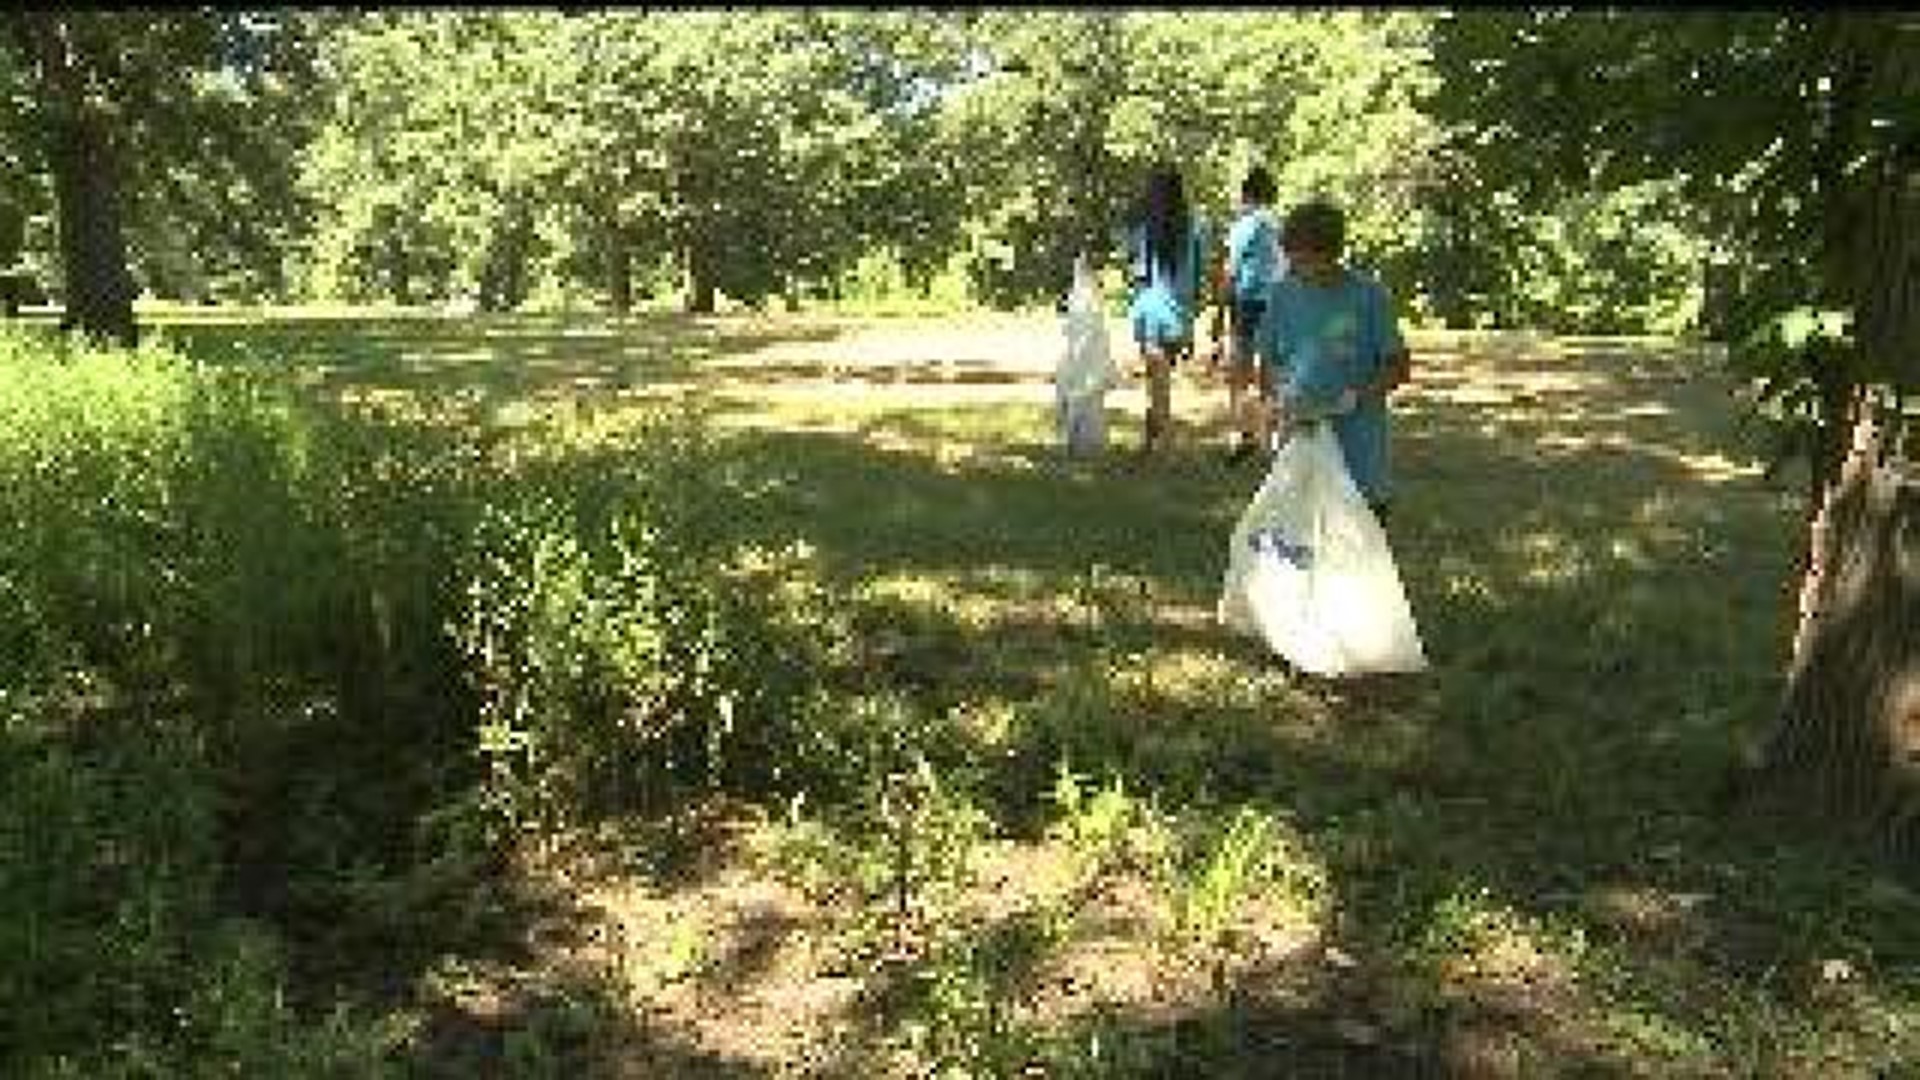 QC cleanup volunteers remove 45,000 pounds of debris